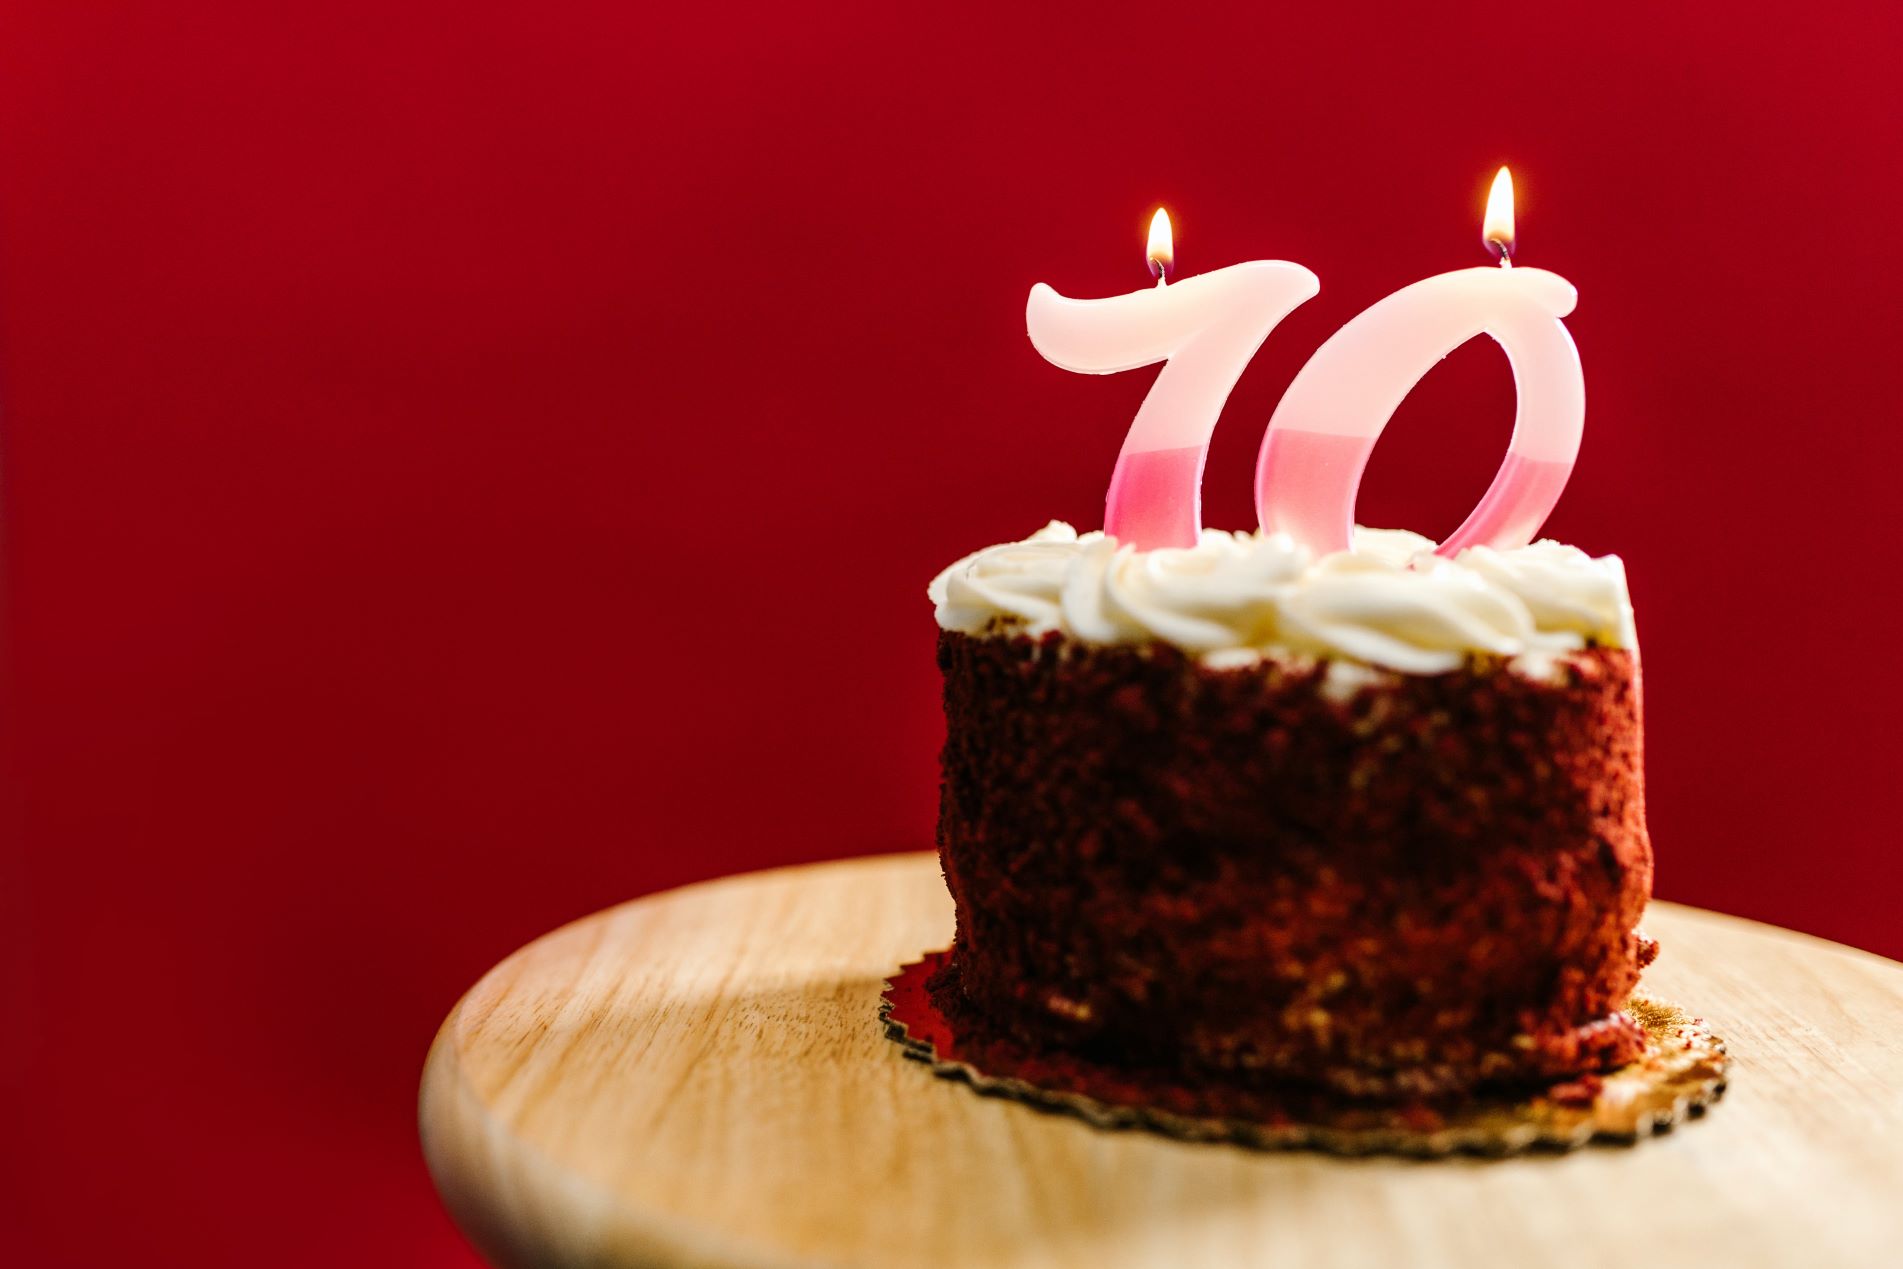 20-fun-facts-about-turning-70